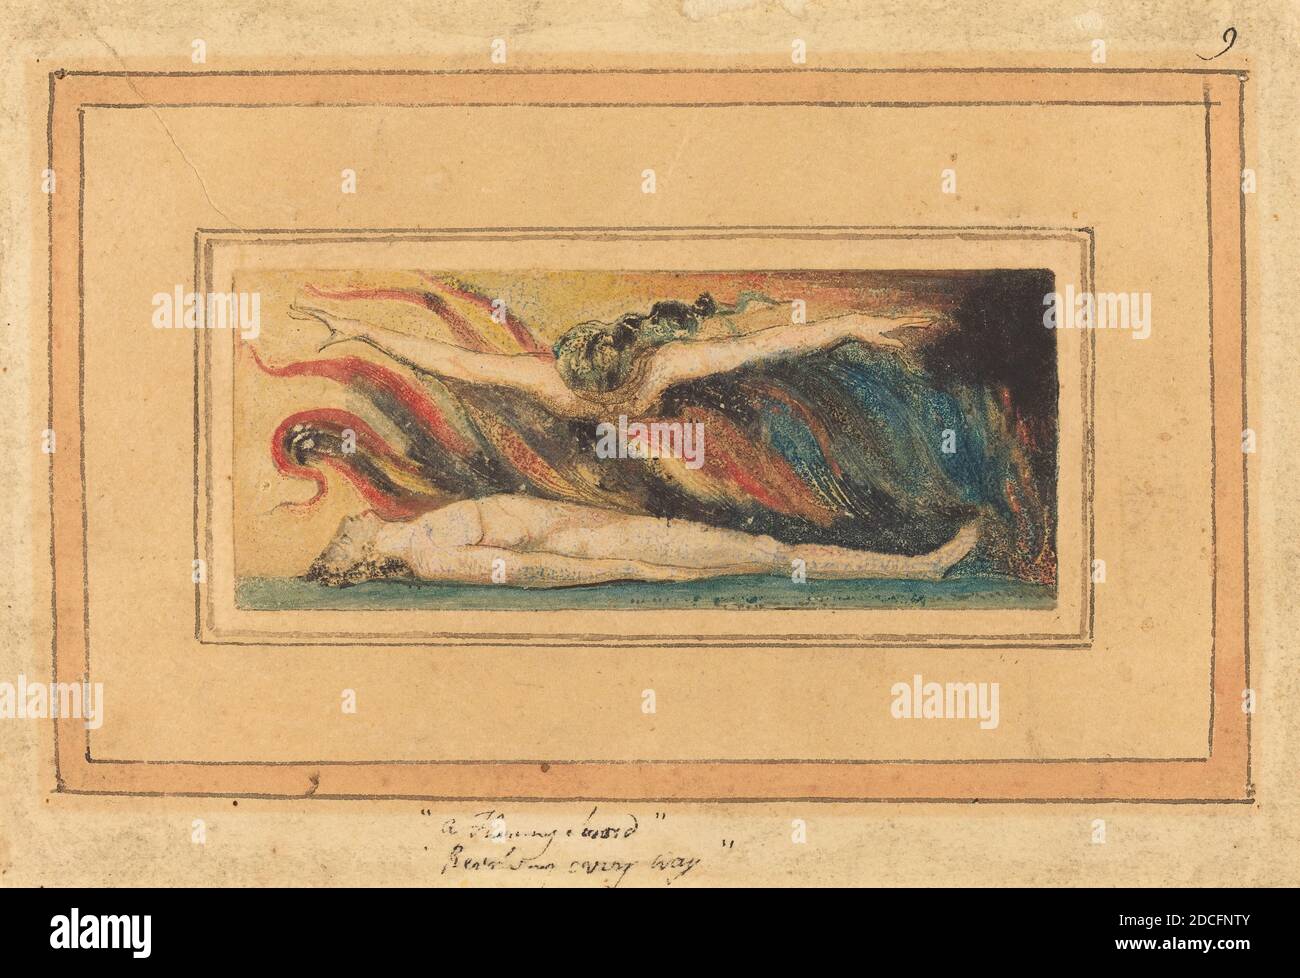 William Blake, (artist), British, 1757 - 1827, The Soul Hovering Over the Body, A Small Book of Designs (copy B): no.5, (series), c. 1796, relief etching, color-printed Stock Photo